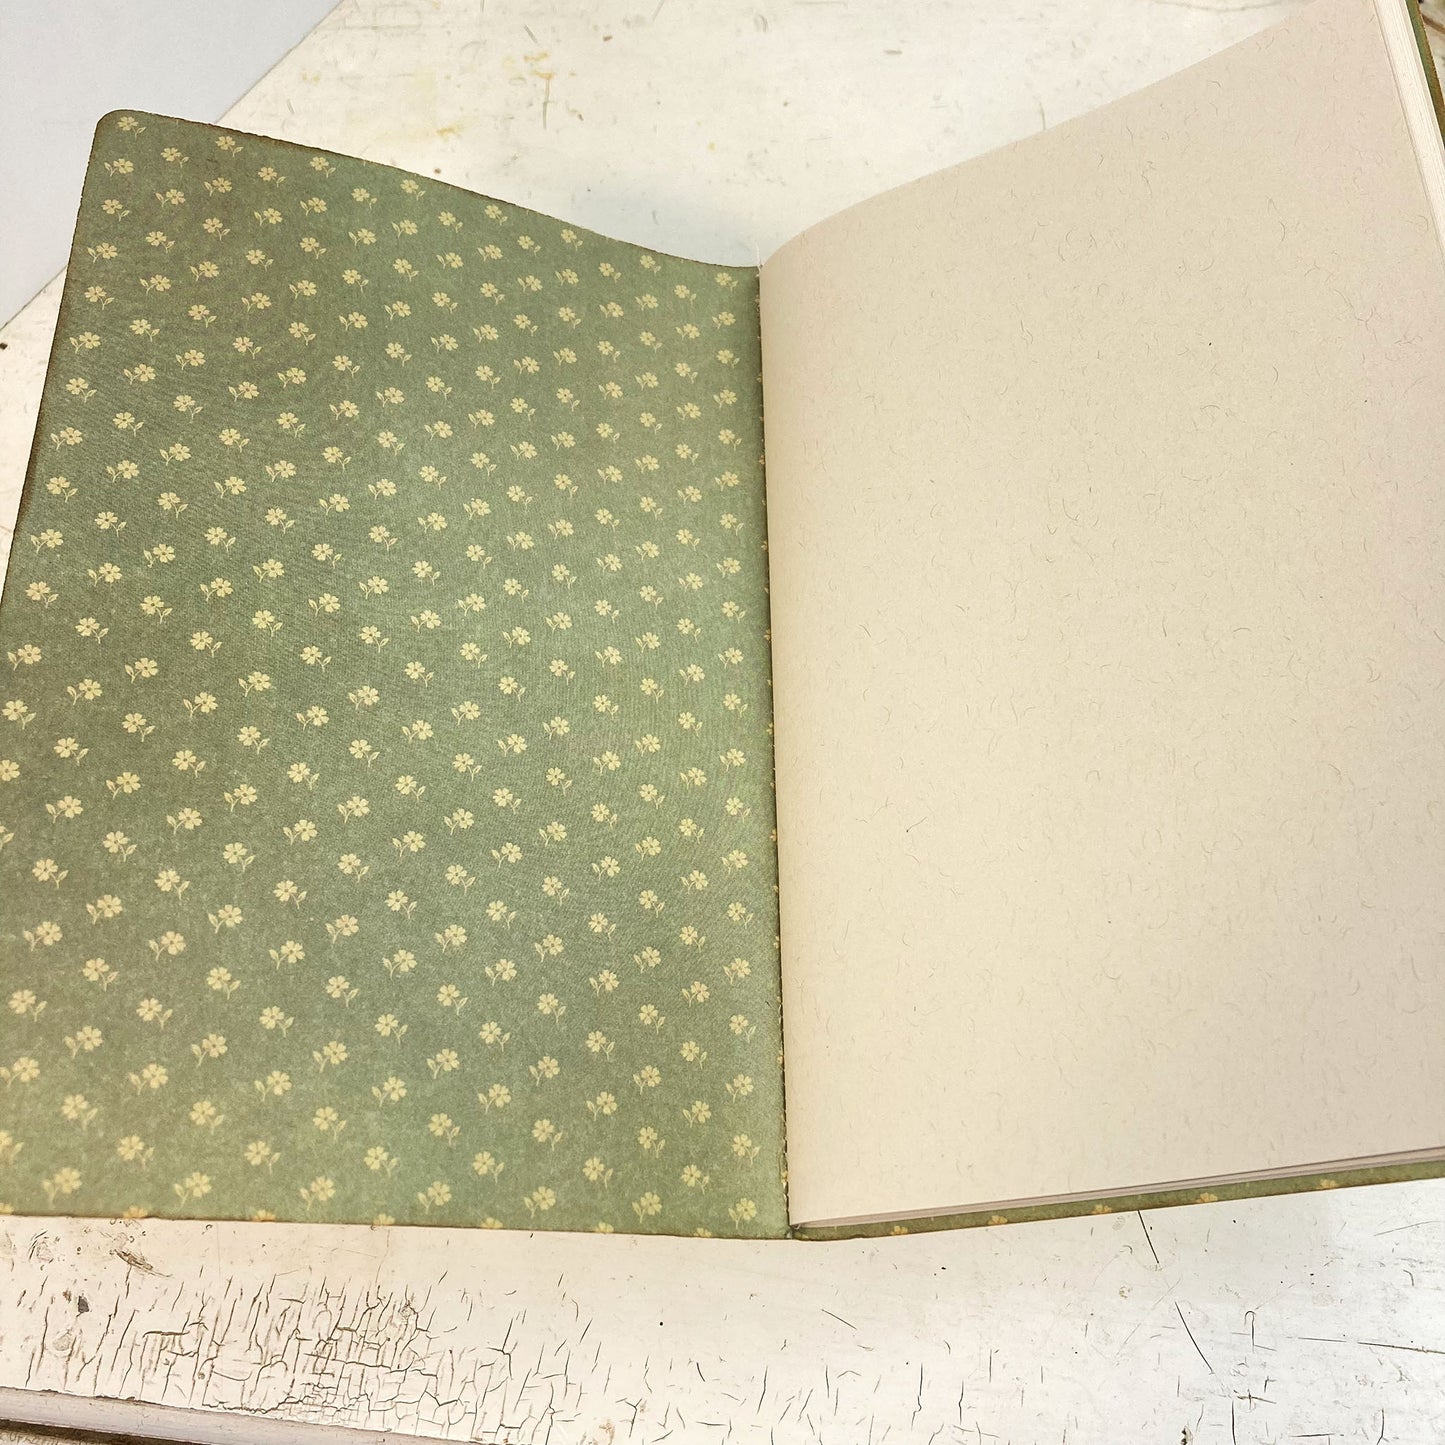 Soft Cover Writing Journal, Blank Newsprint Pages, Wallpaper Cover, Fits in your Purse